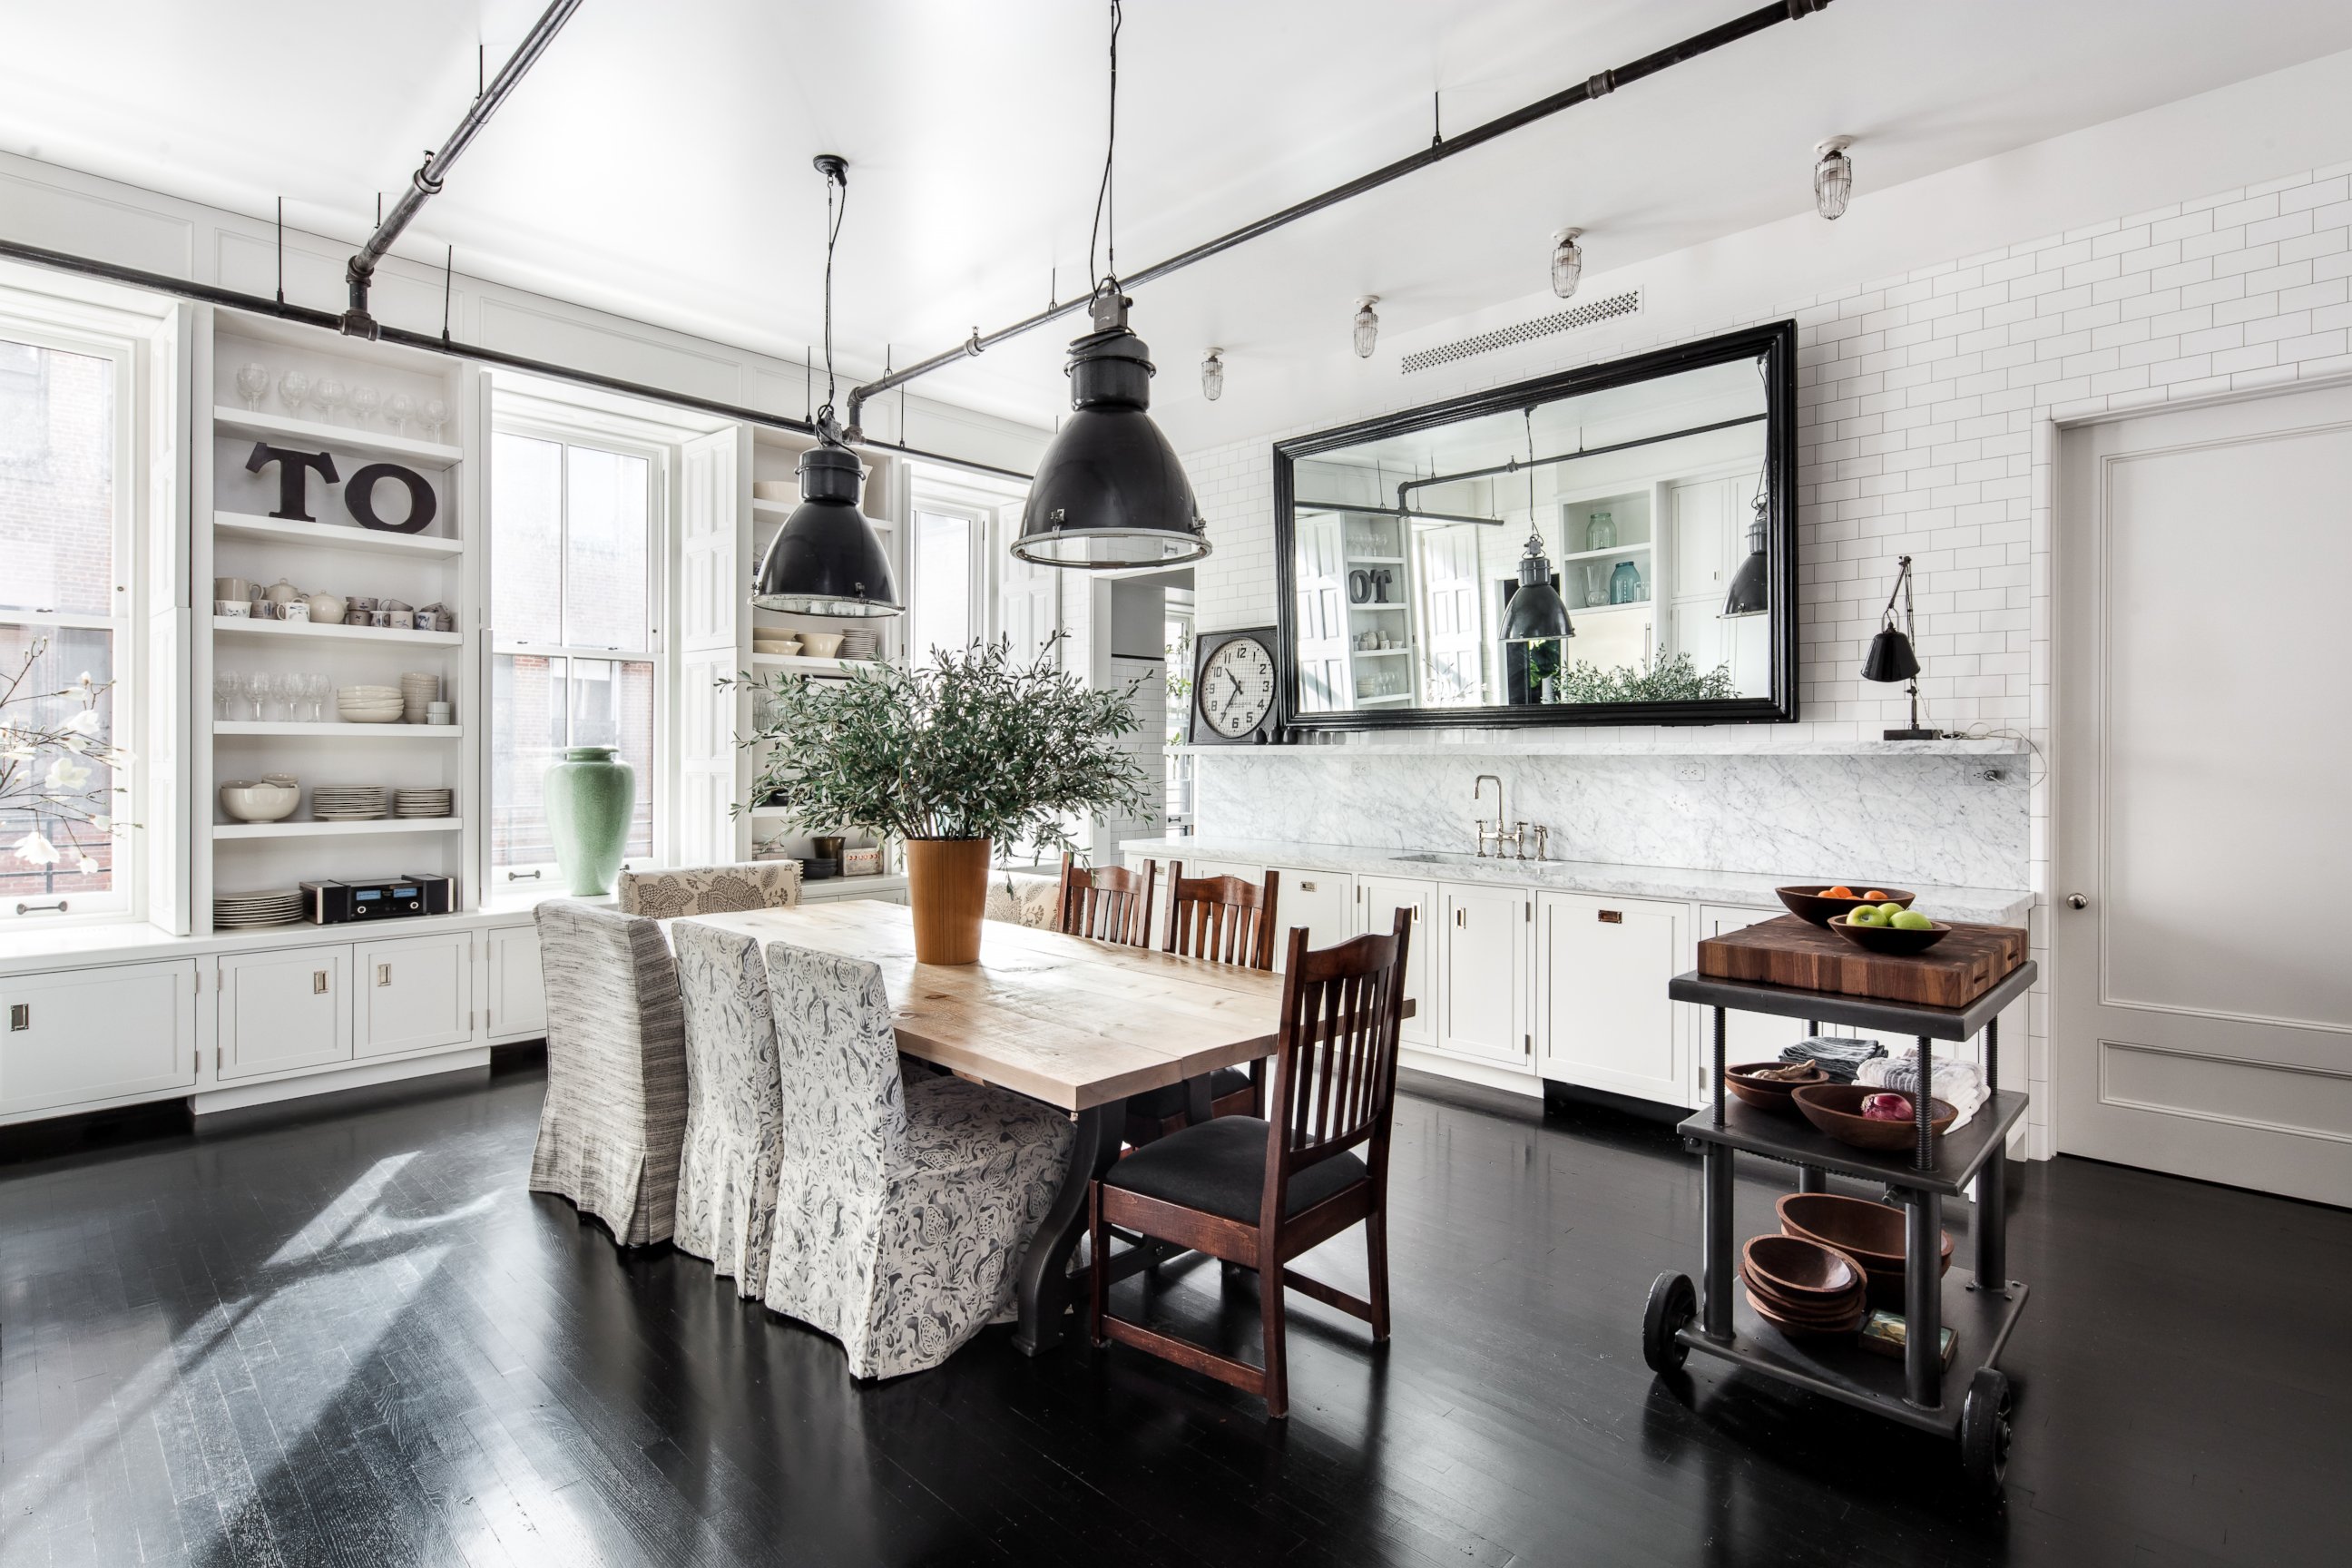 PHOTO: Ryan expanded and renovated the kitchen after buying the apartment from actor Hank Azaria in 2014.